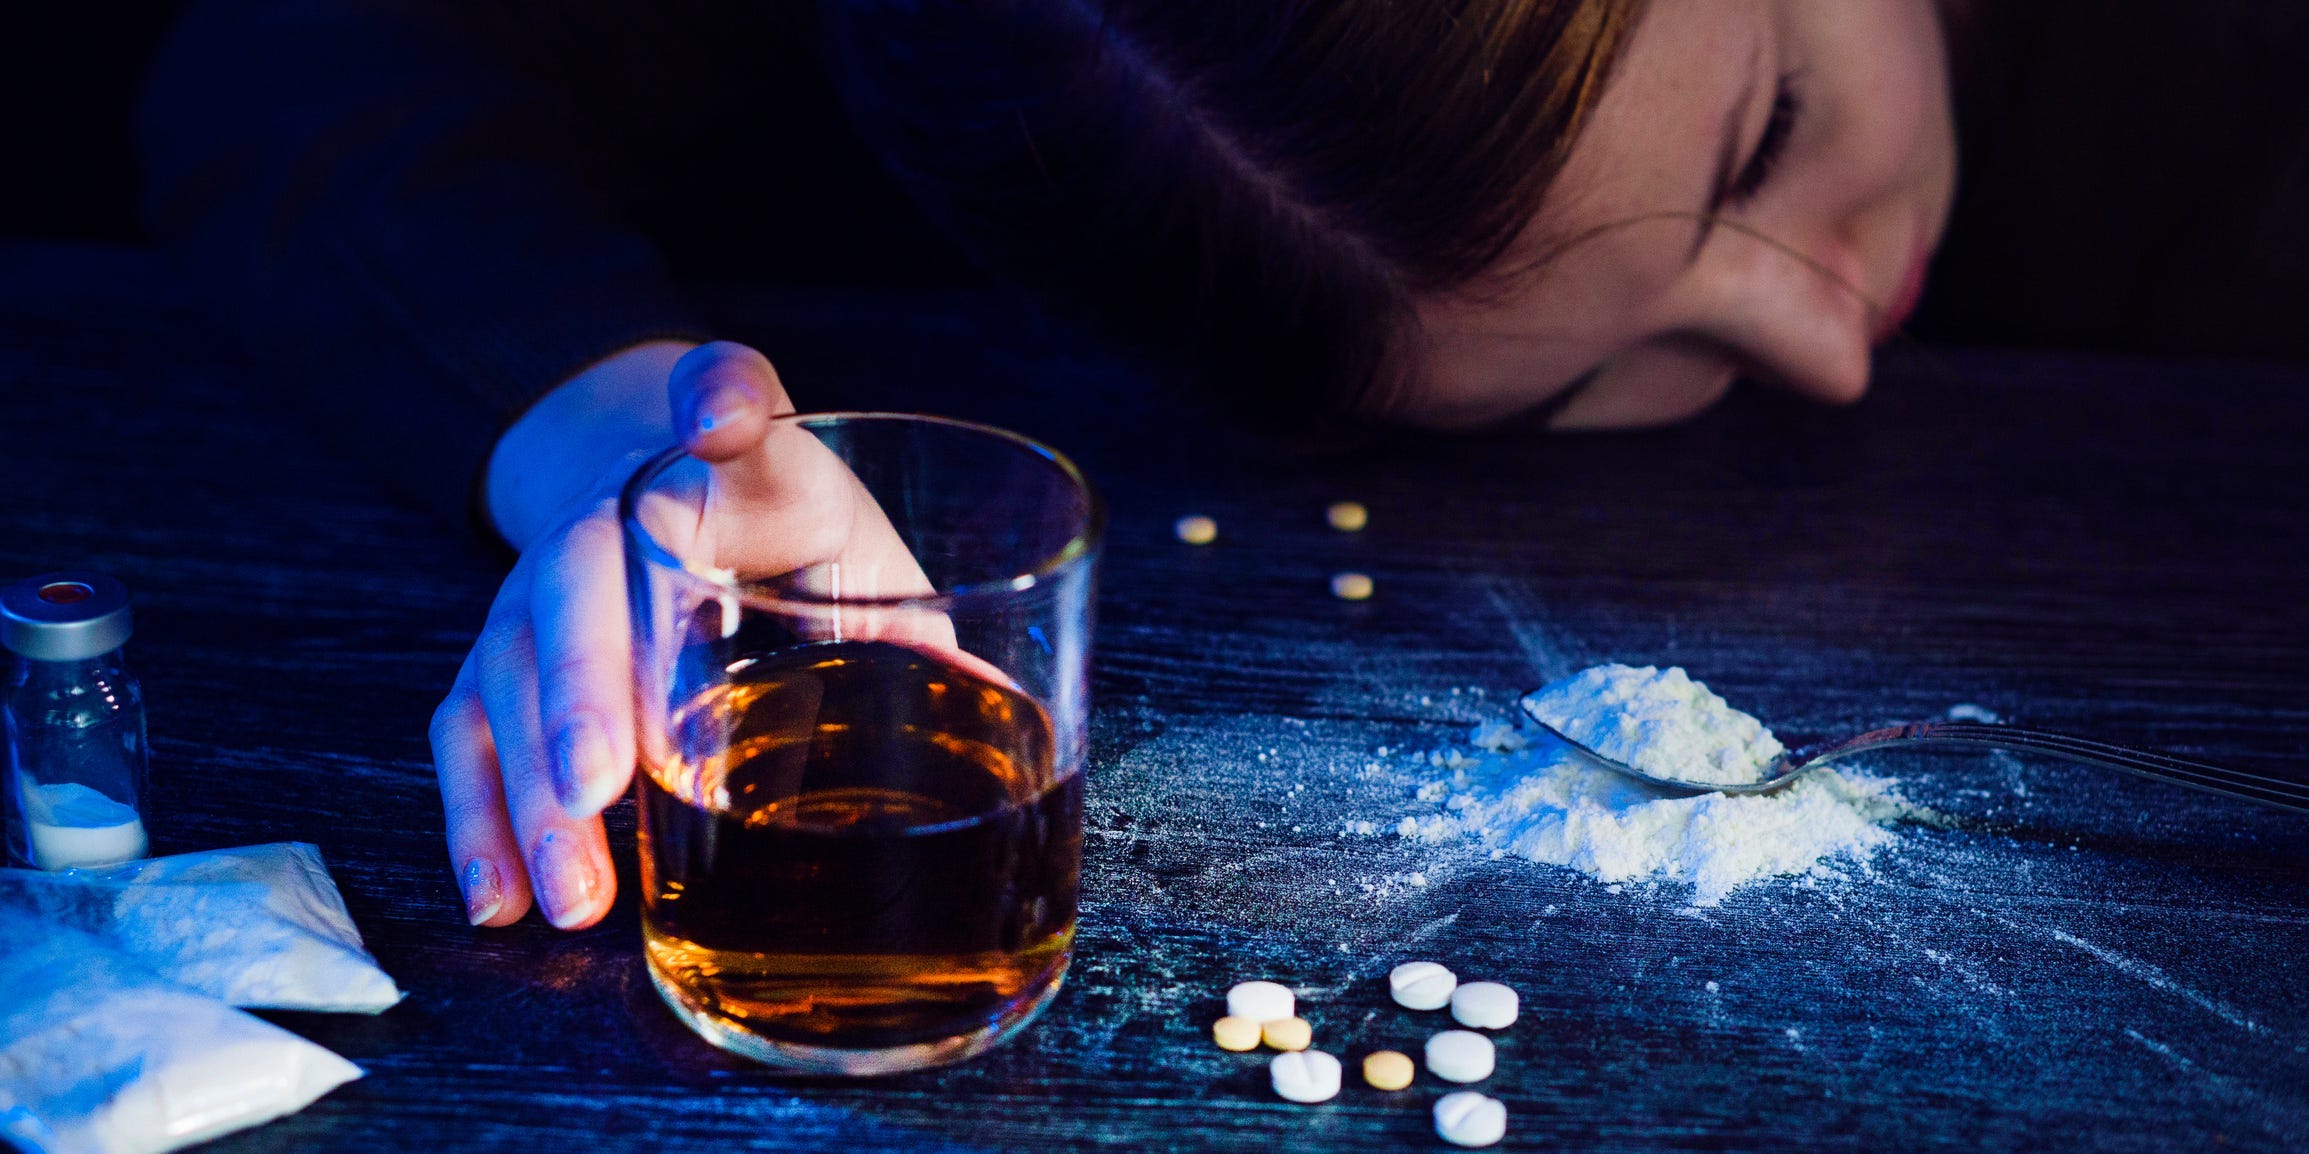 A person lies passed out on the floor with an unfinished glass of whiskey and some pills in front of them.